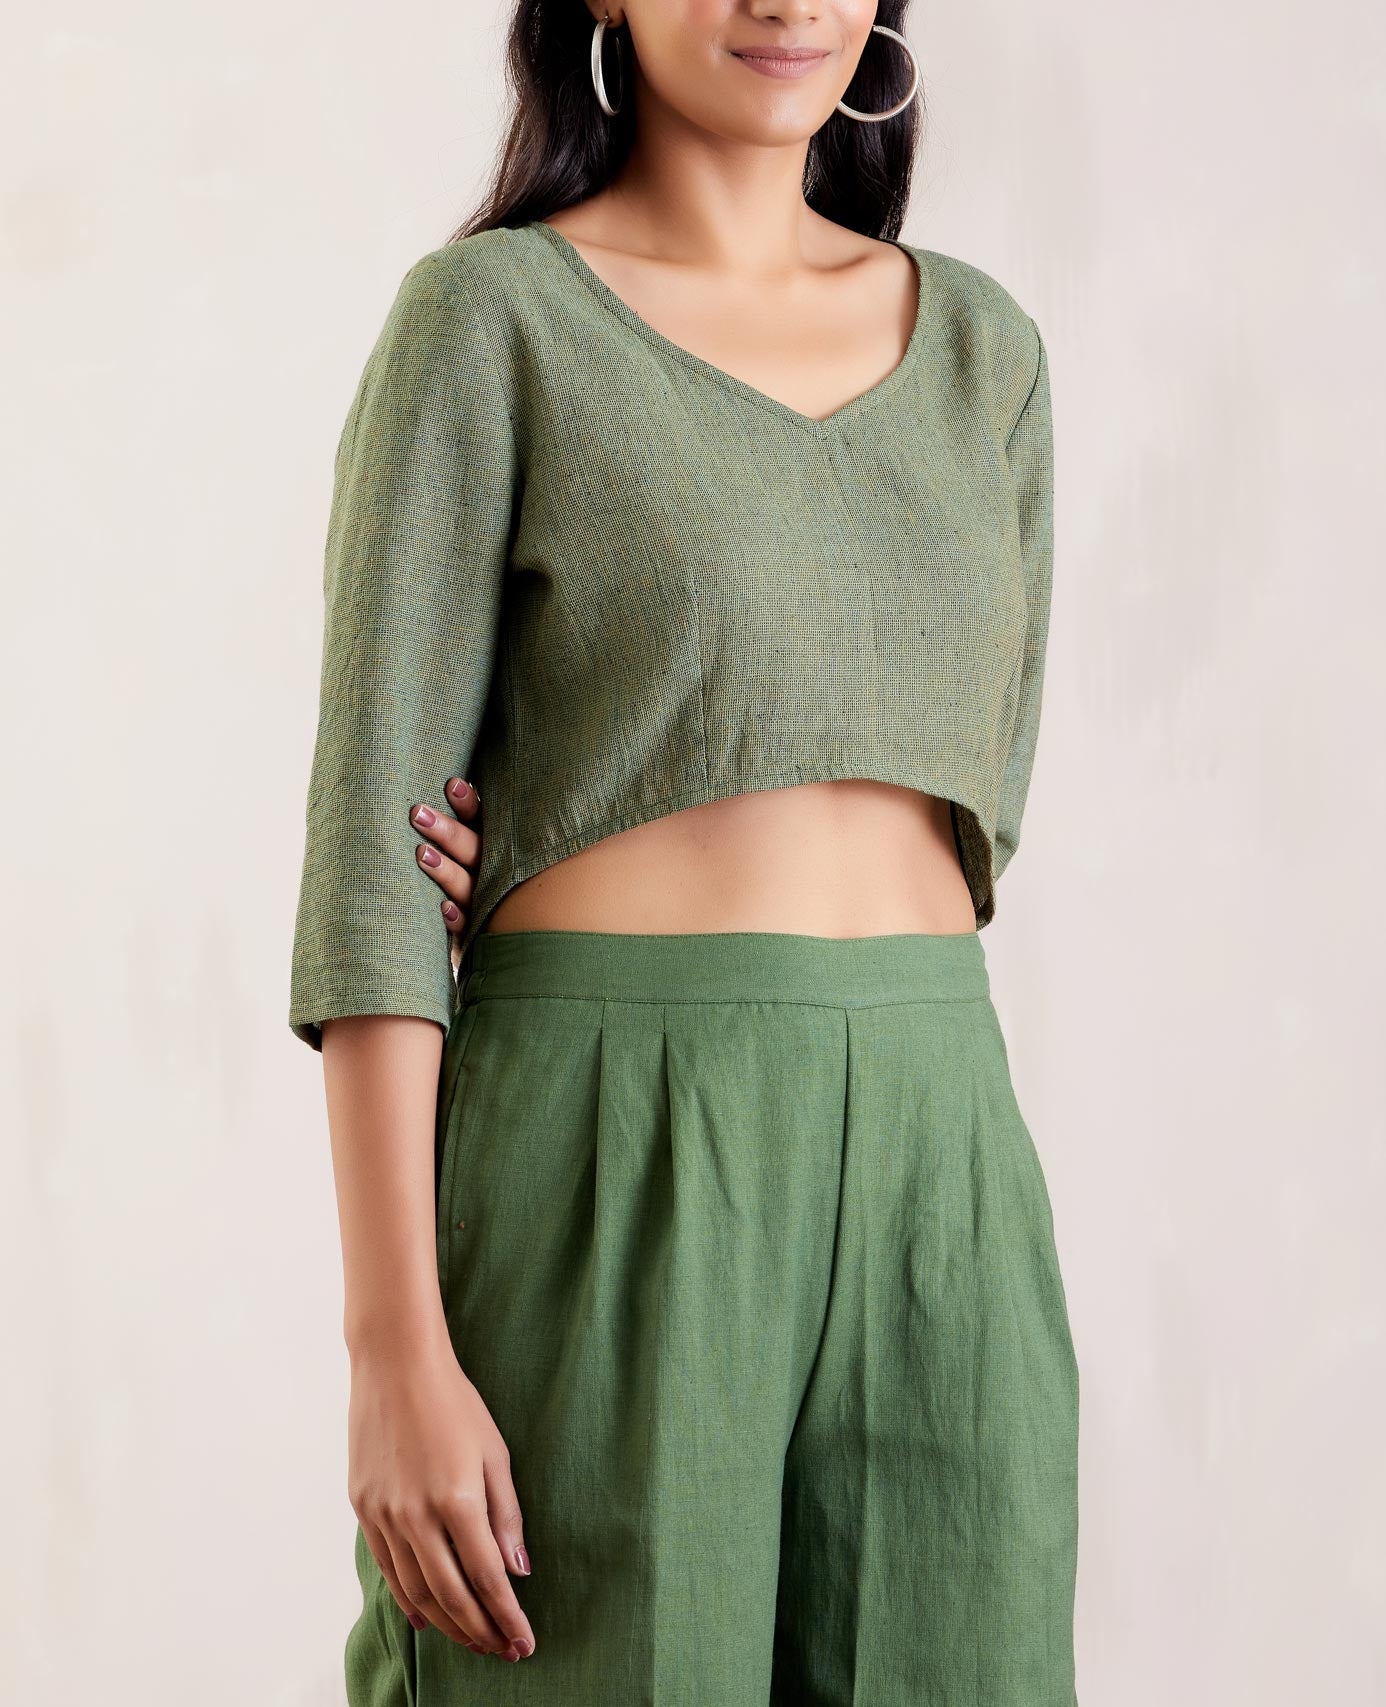 Textured Green Cotton Crop Top Co-Ord Set - The Indian Cause